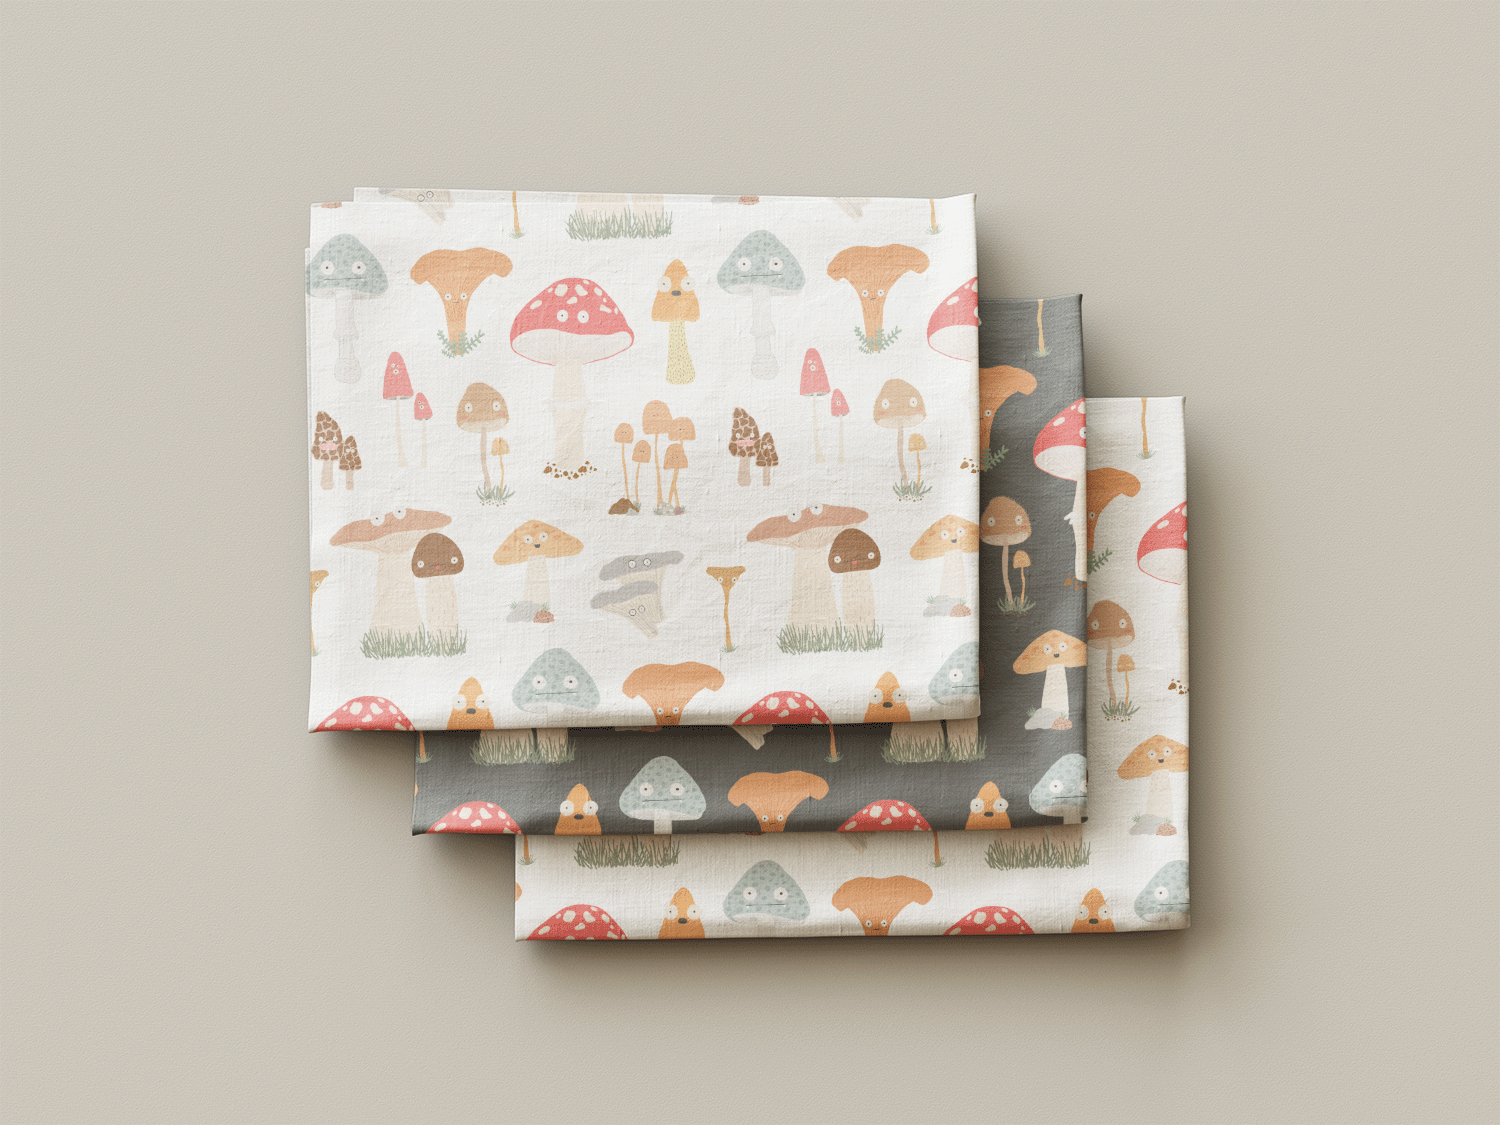 A mockup of the Fungi Friends mushroom fabrics illustrated for Wooly Tops.